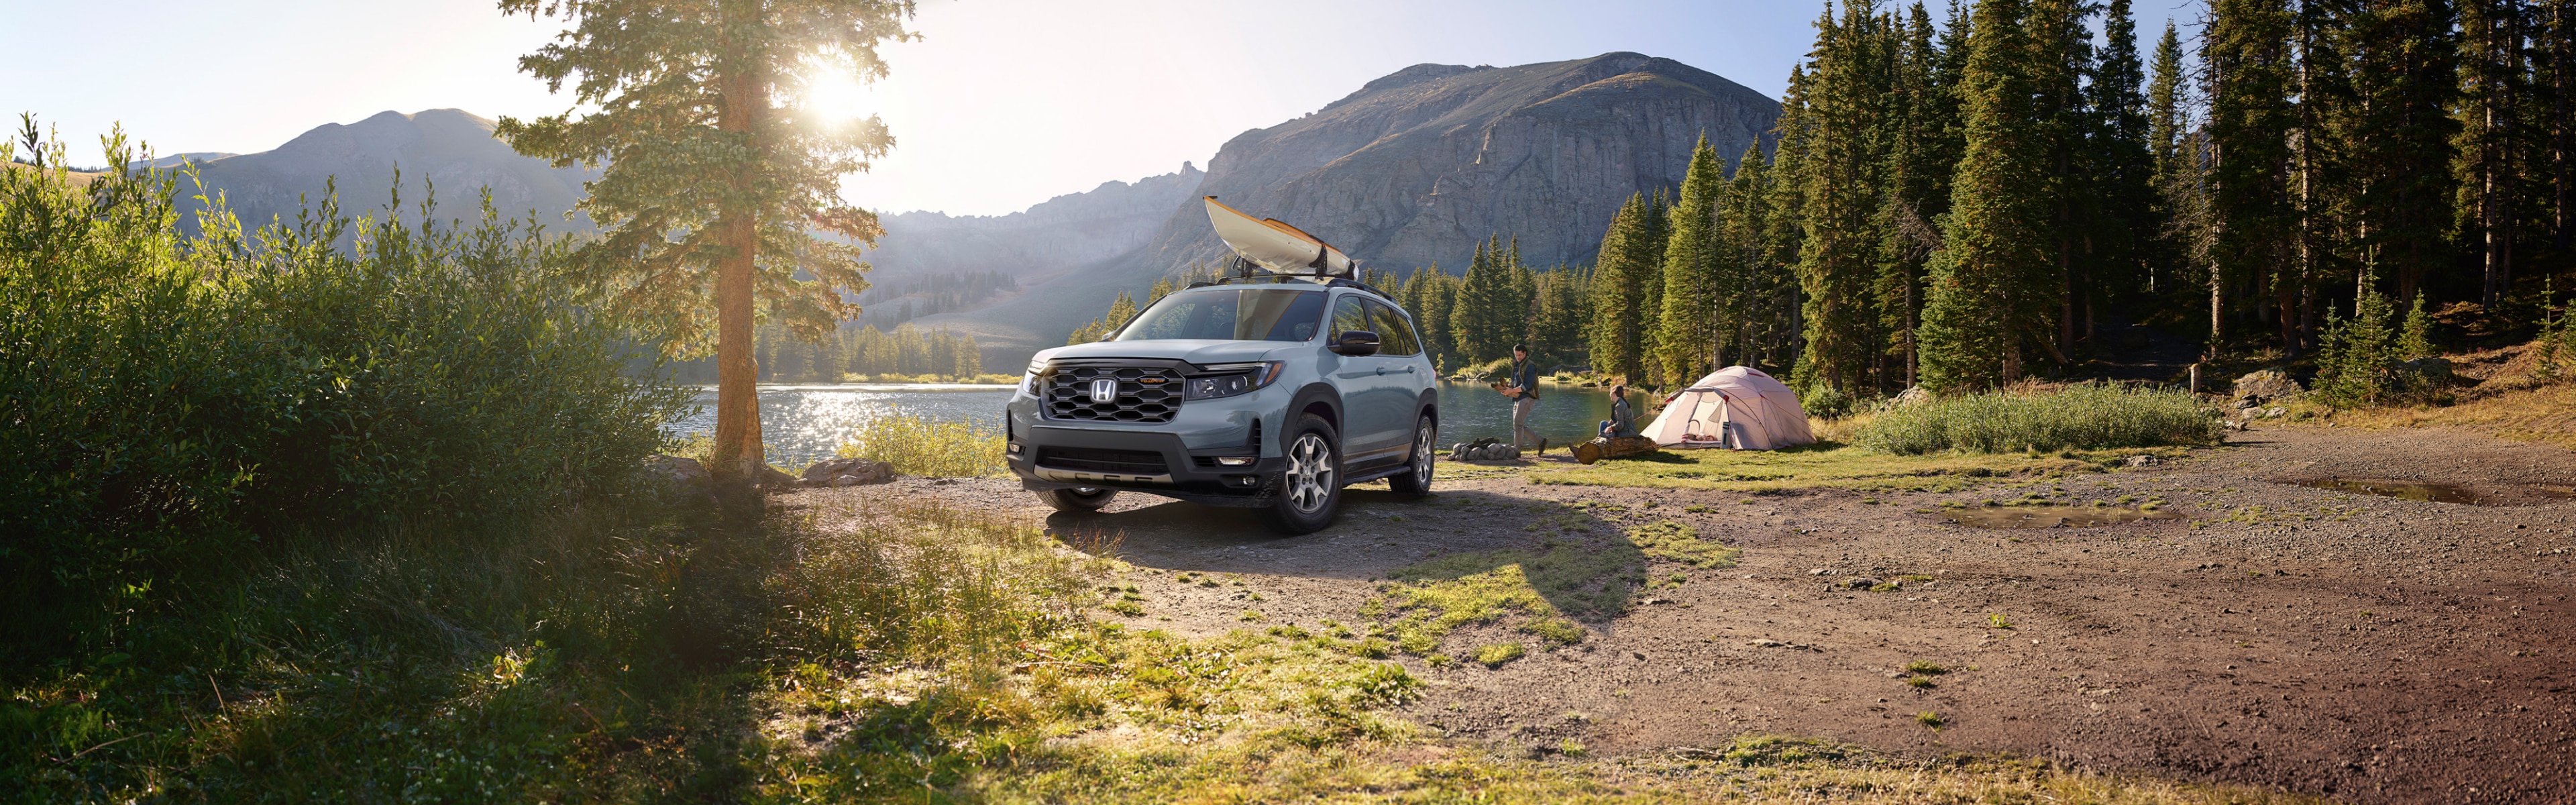 Front 3/4 view of 2021 Honda Passport Touring in Modern Steel Metallic parked at a campsite next to a lake.